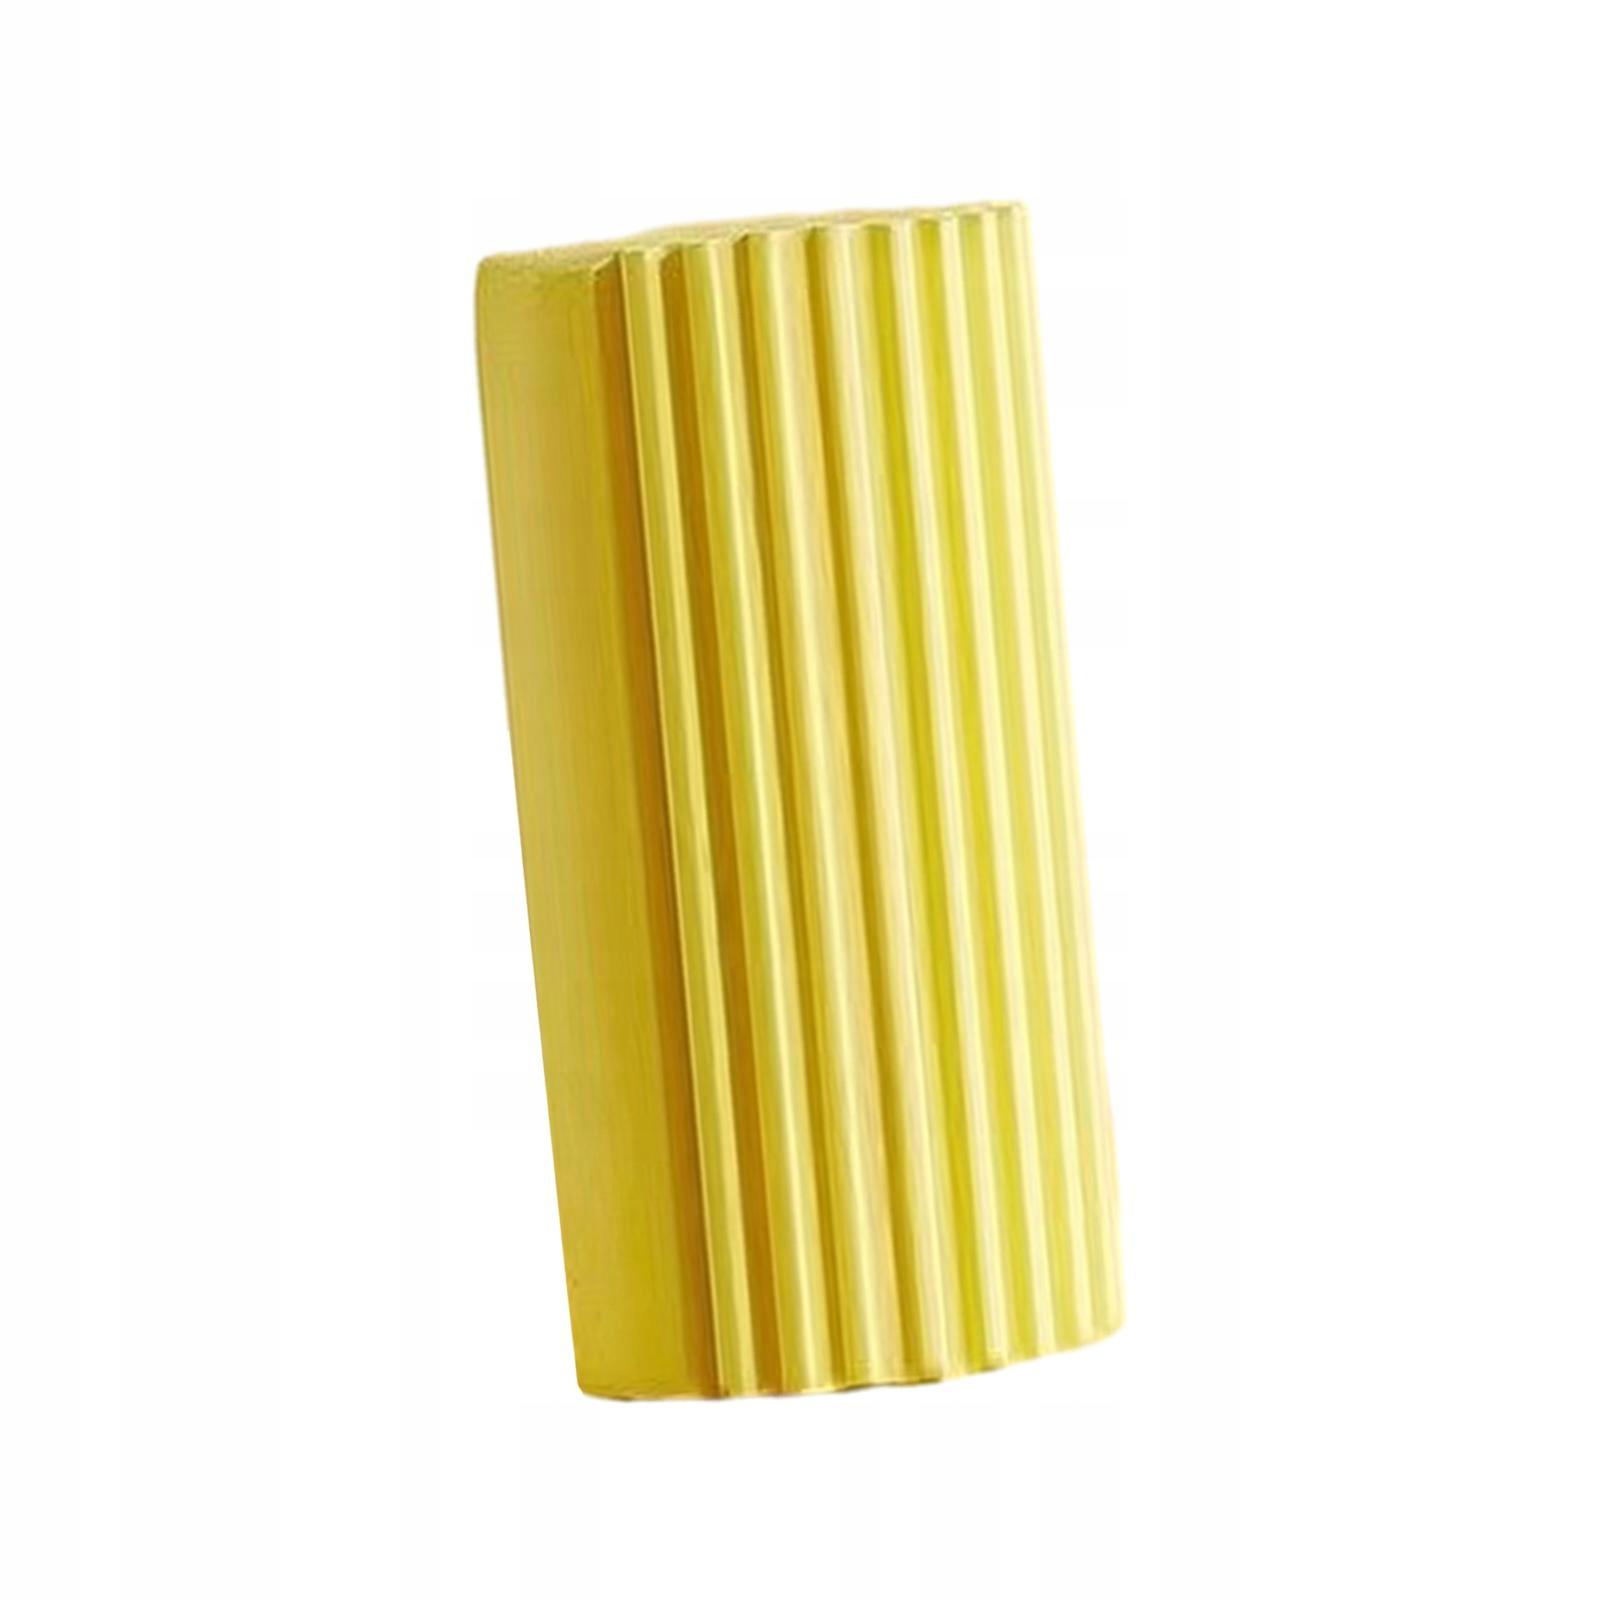 5 Pieces Damp Clean Duster Sponge Household yellow